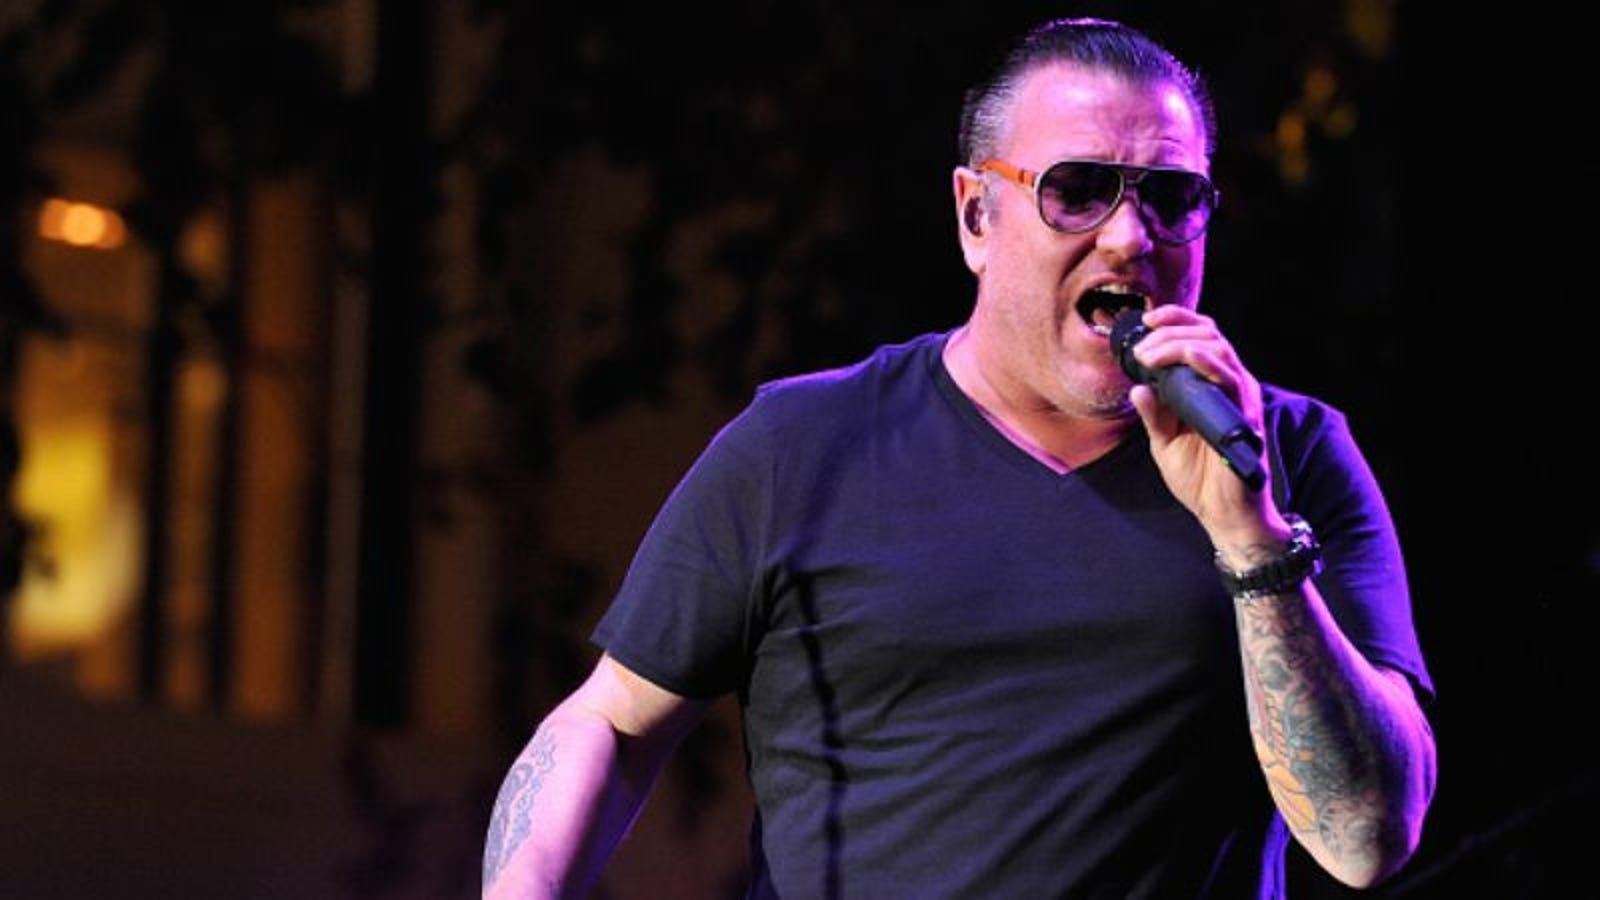 Smash Mouth frontman Steve Harwell is recovering after collapsing on stage1600 x 900